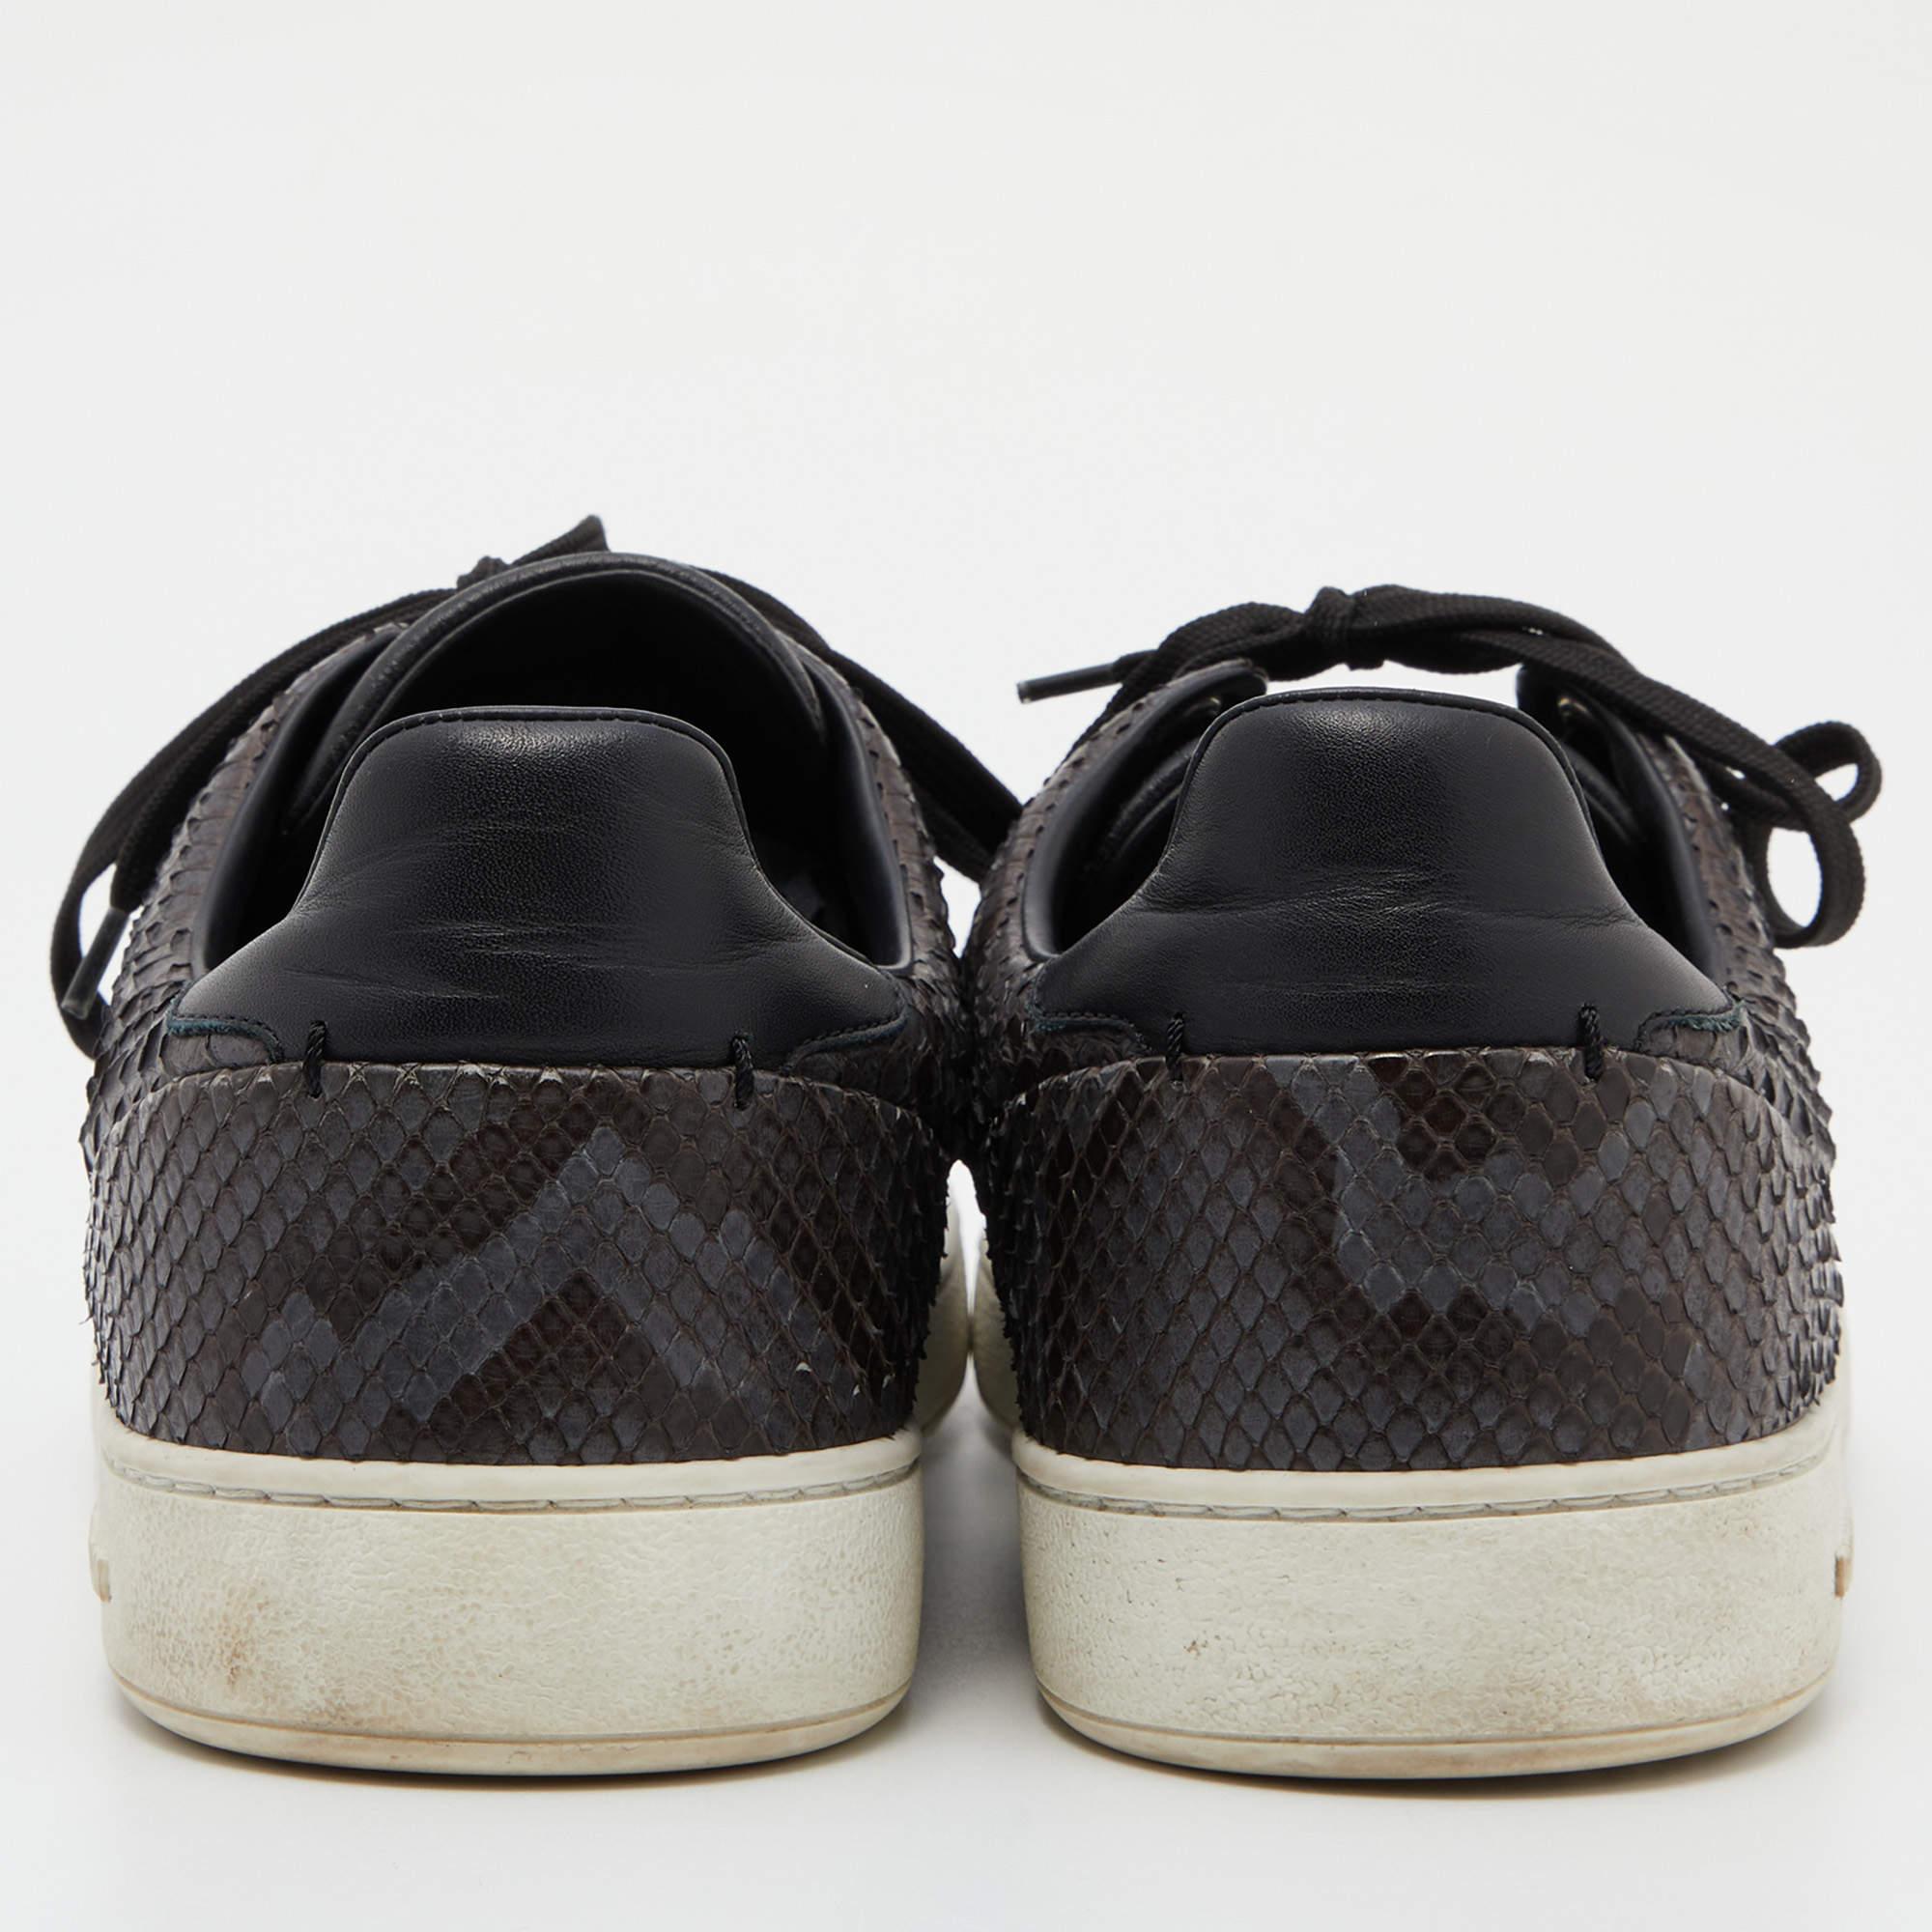 Louis Vuitton Two Tone Python Frontrow Sneakers Size 43.5 For Sale 1